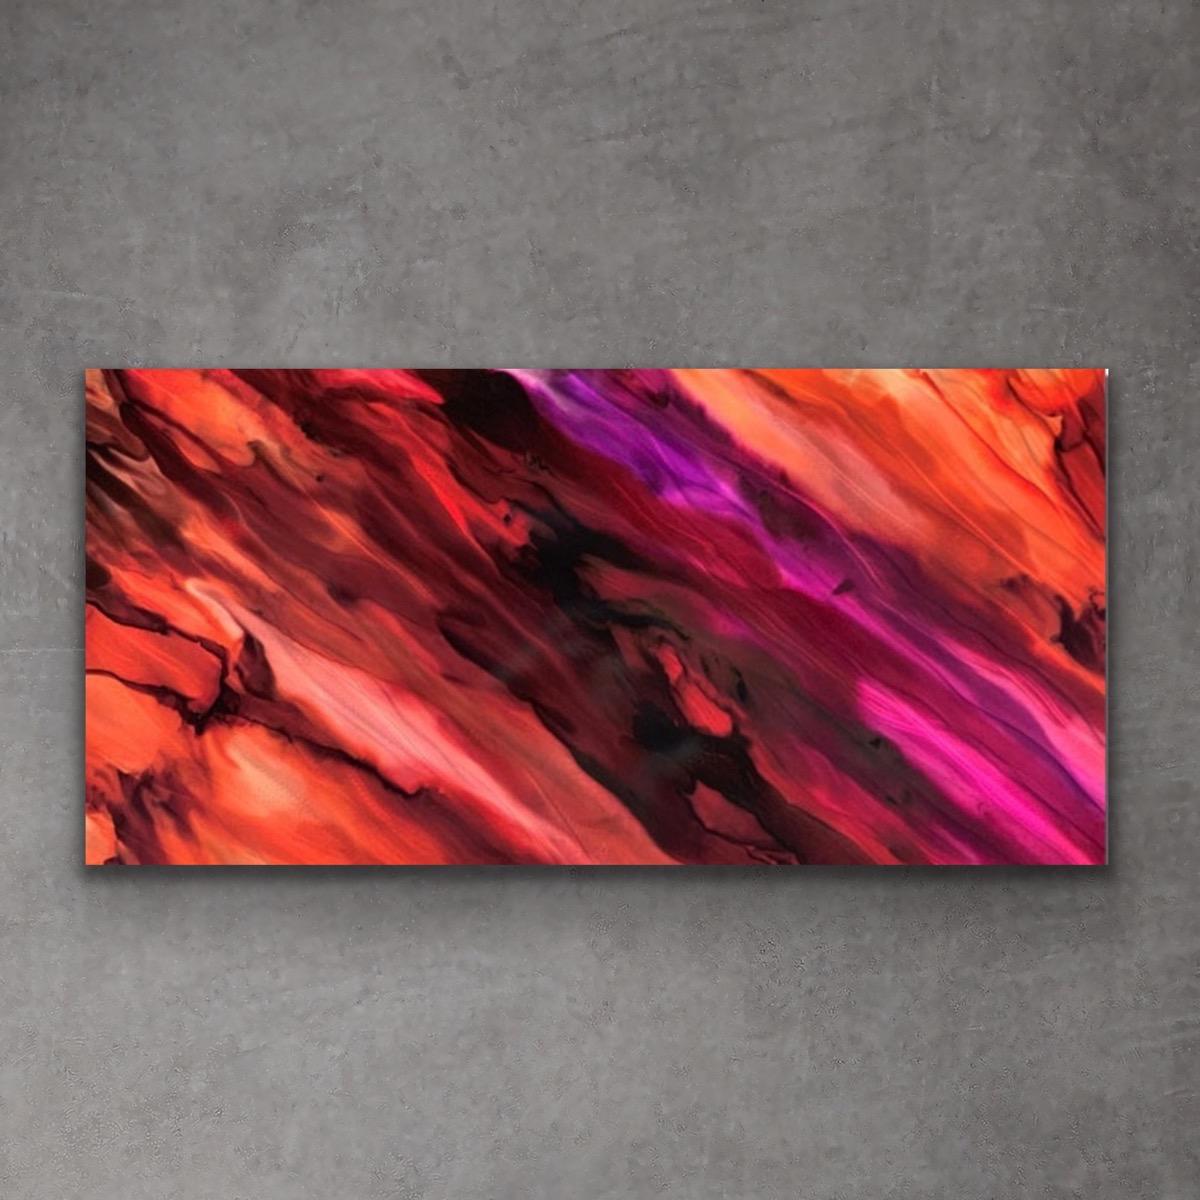 This contemporary abstract painting include warm tones of red, orange, fuchsia, and purple. Printed on a lightweight metal composite, your artwork arrives ready to hang. The automotive high-gloss clear coat offers both UV protection and high-end